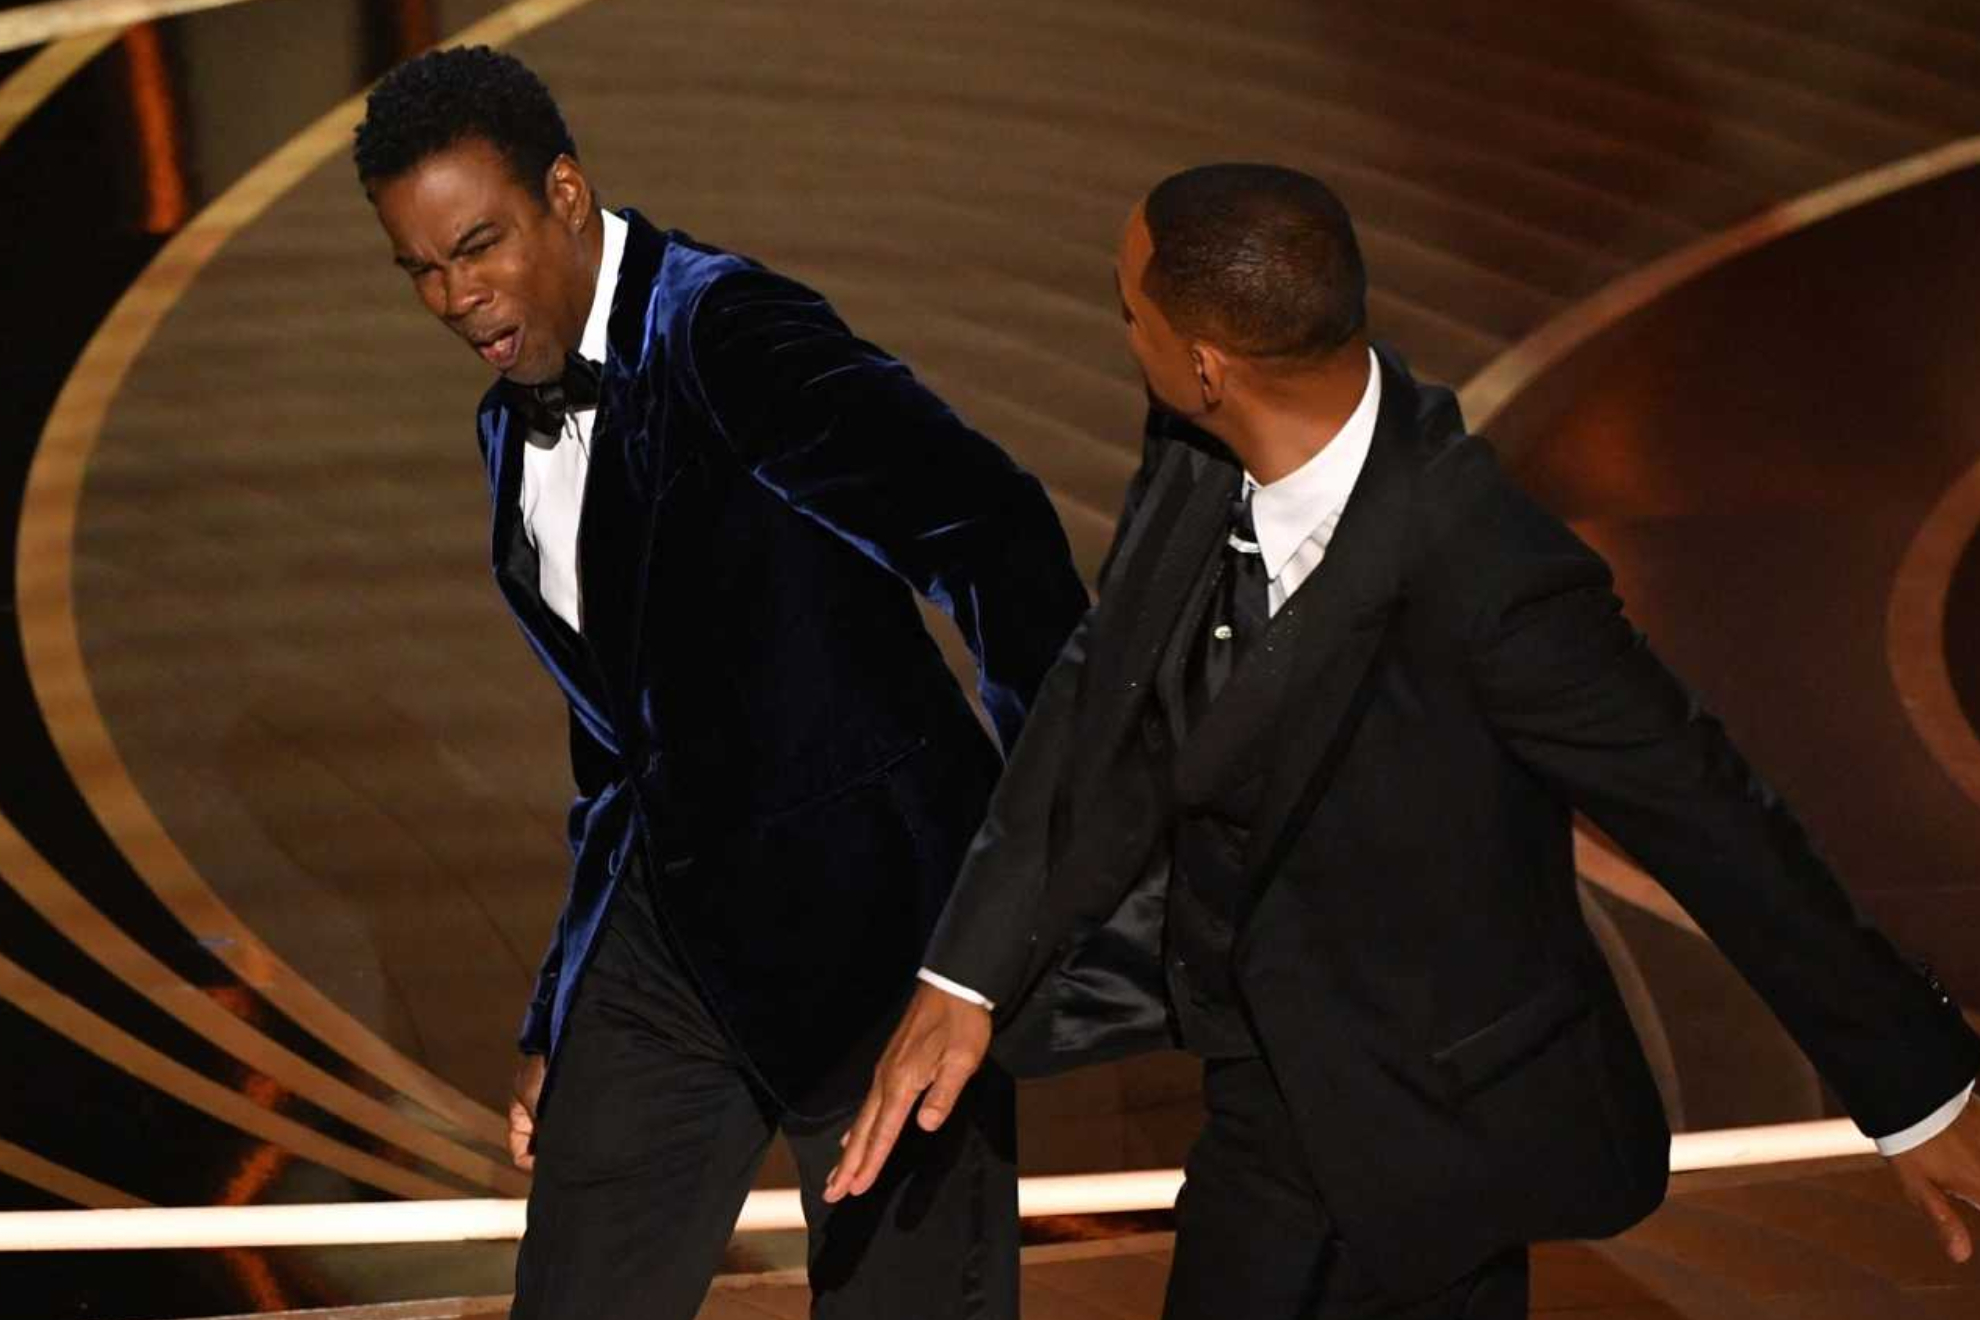 The moment Will Smith slapped Chris Rock at the Oscars 2022